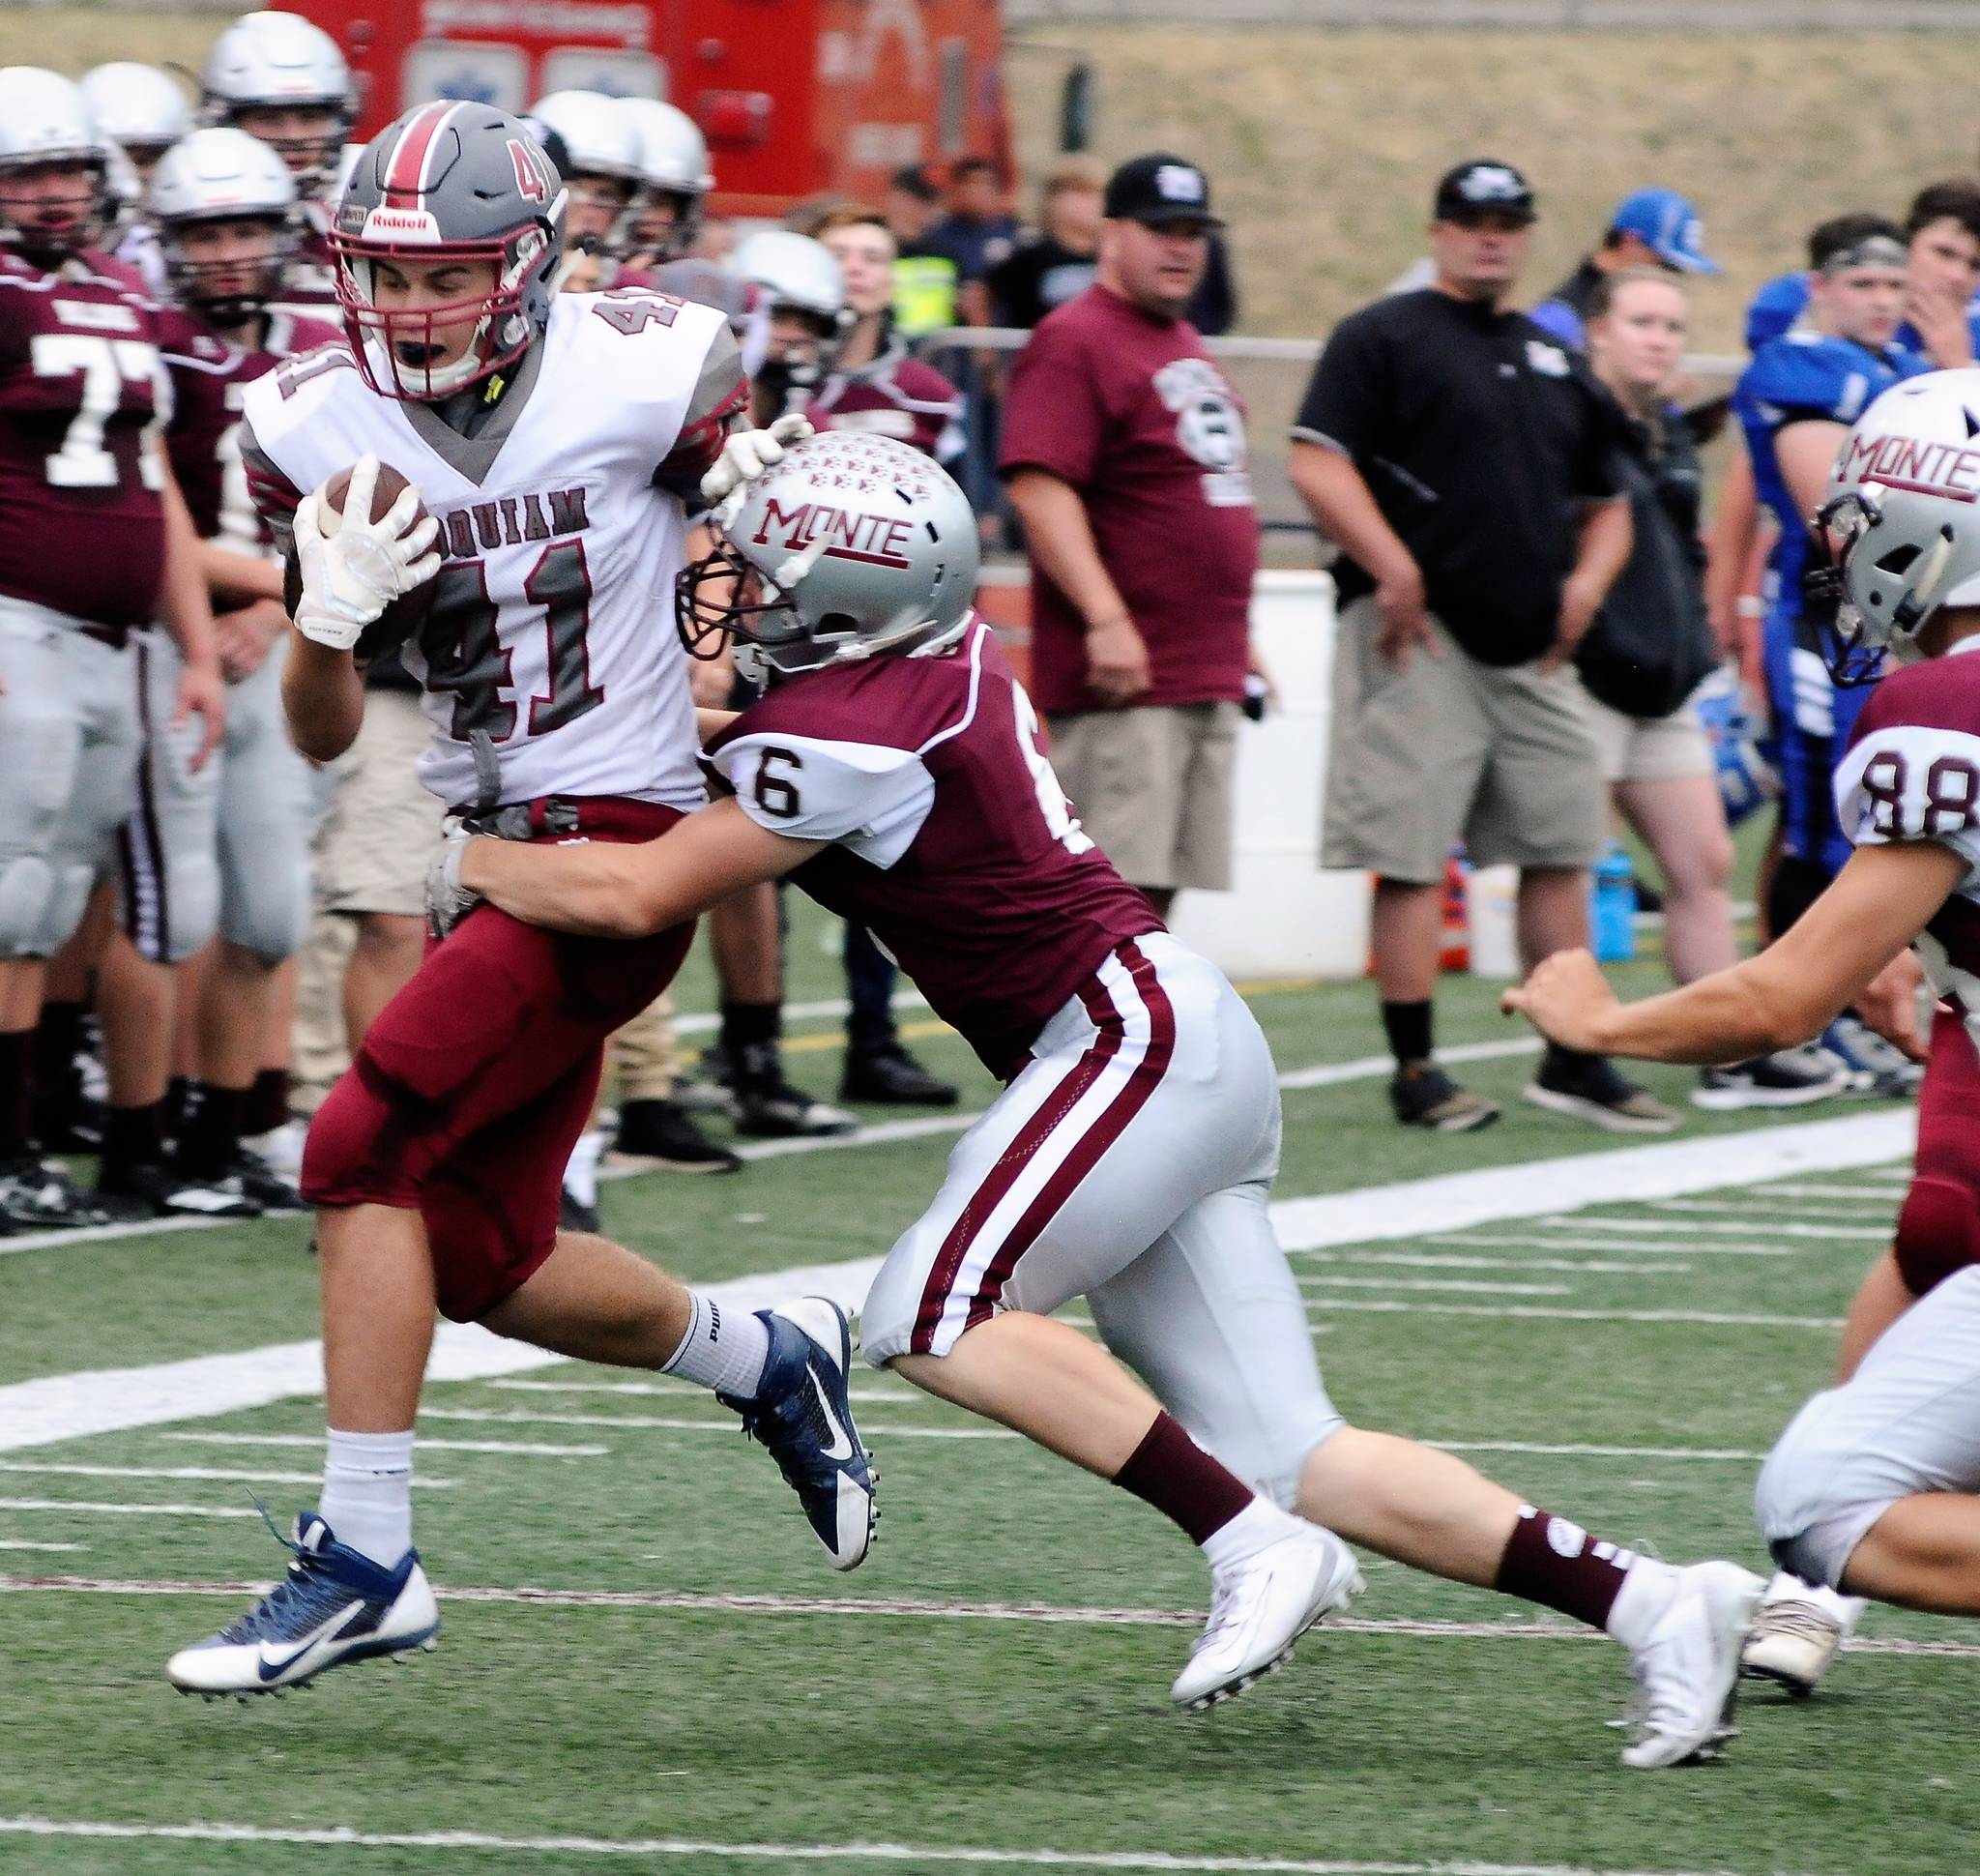 Hoquiam’s Ben Estes is run out of bounds by Montesano’s Hunter Schnoor at the Jamboree in Montesano on Friday.(Hasani Grayson | Grays Harbor News Group)